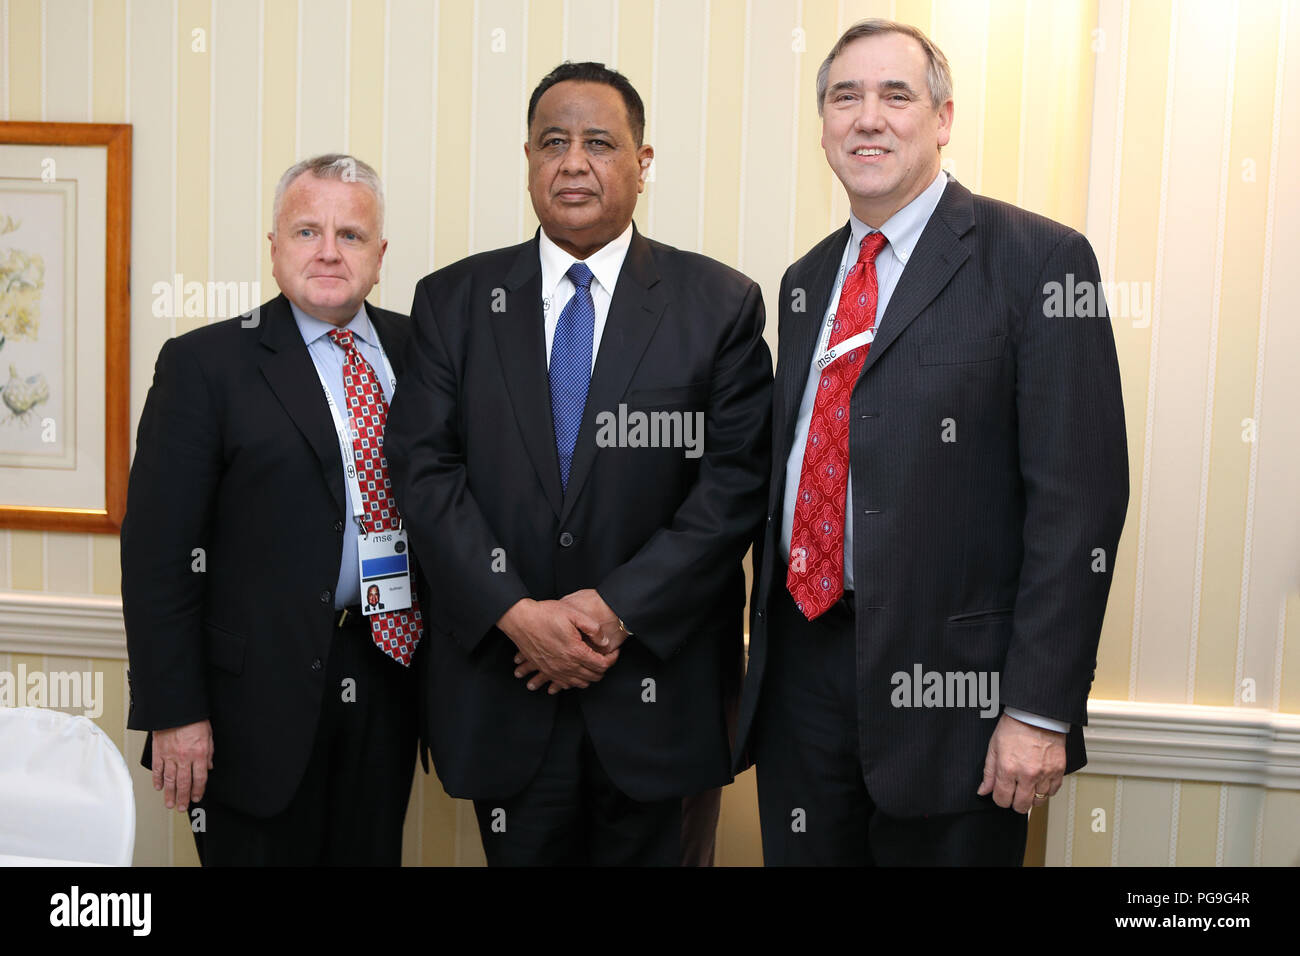 Deputy Secretary of State John Sullivan meets with Sudanese Foreign Minister Ibrahim Ghandour and U.S. Senator Jeff Merkley at the Munich Security Conference in Munich, Germany on February 16, 2018. Stock Photo